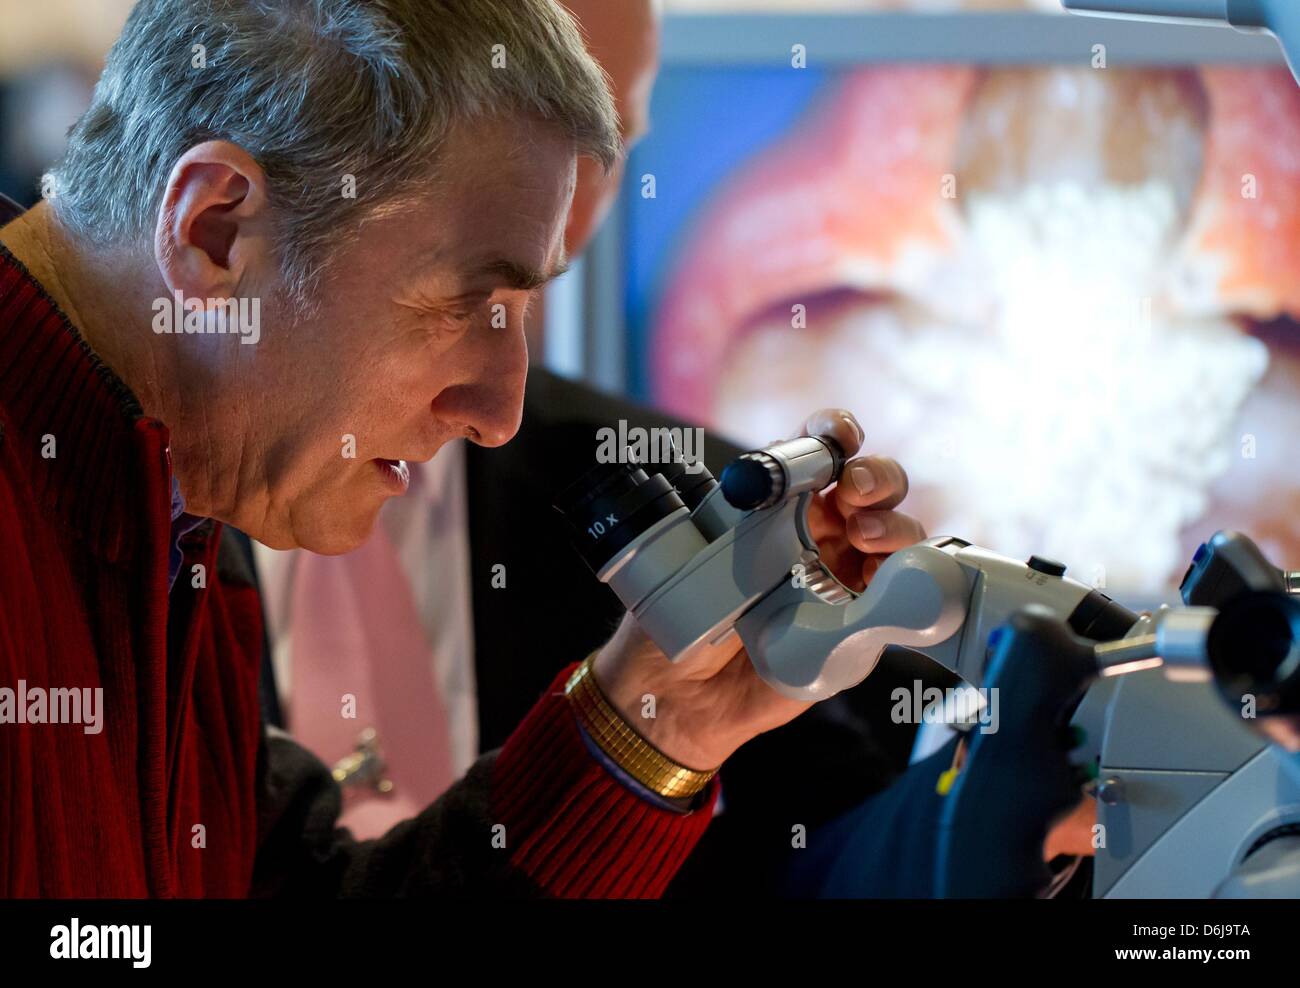 Hans-Juergen Kirchner observes the microscope Pentero 900 during the shareholders meeting of the multinational medical technology company Carl Zeiss Meditec AG in Weimar, Germany, 09 March 2012. The TecDAX enterprise achieved an increase in turnover of 12.1 percent leading to 759 million euros and managed to achieve earnings before interest and taxes of 103.6 million euros. Photo:  Stock Photo